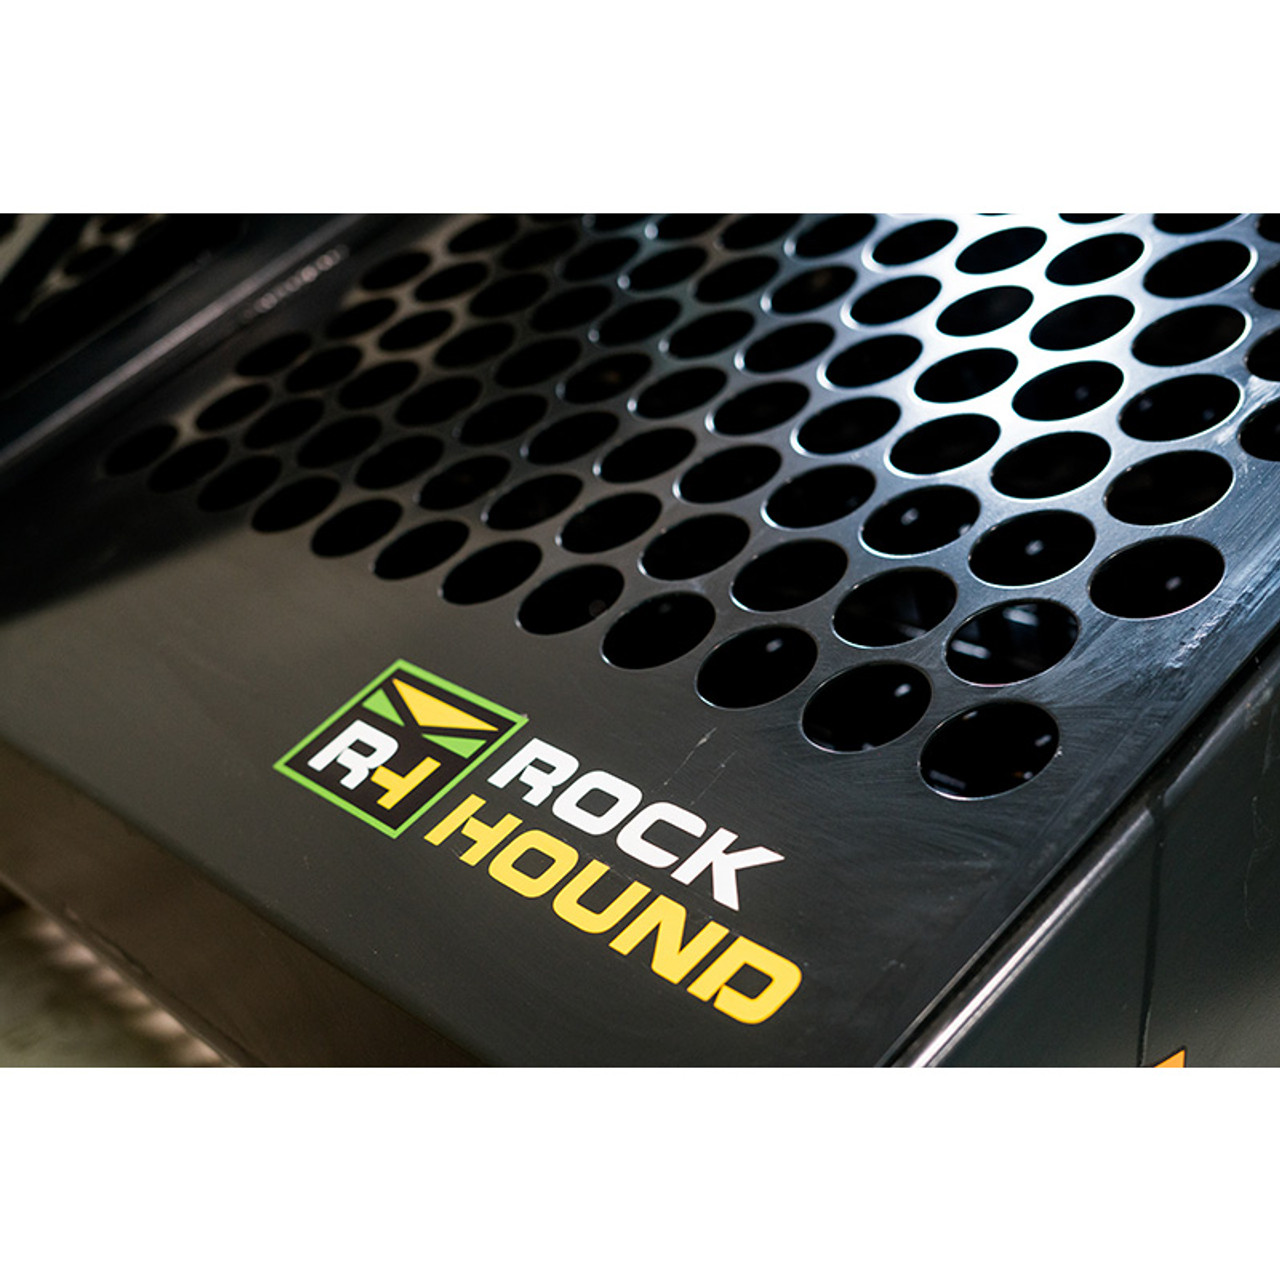 #501- New 68 Land Honor Rock hound for Skid Steer — Carroll